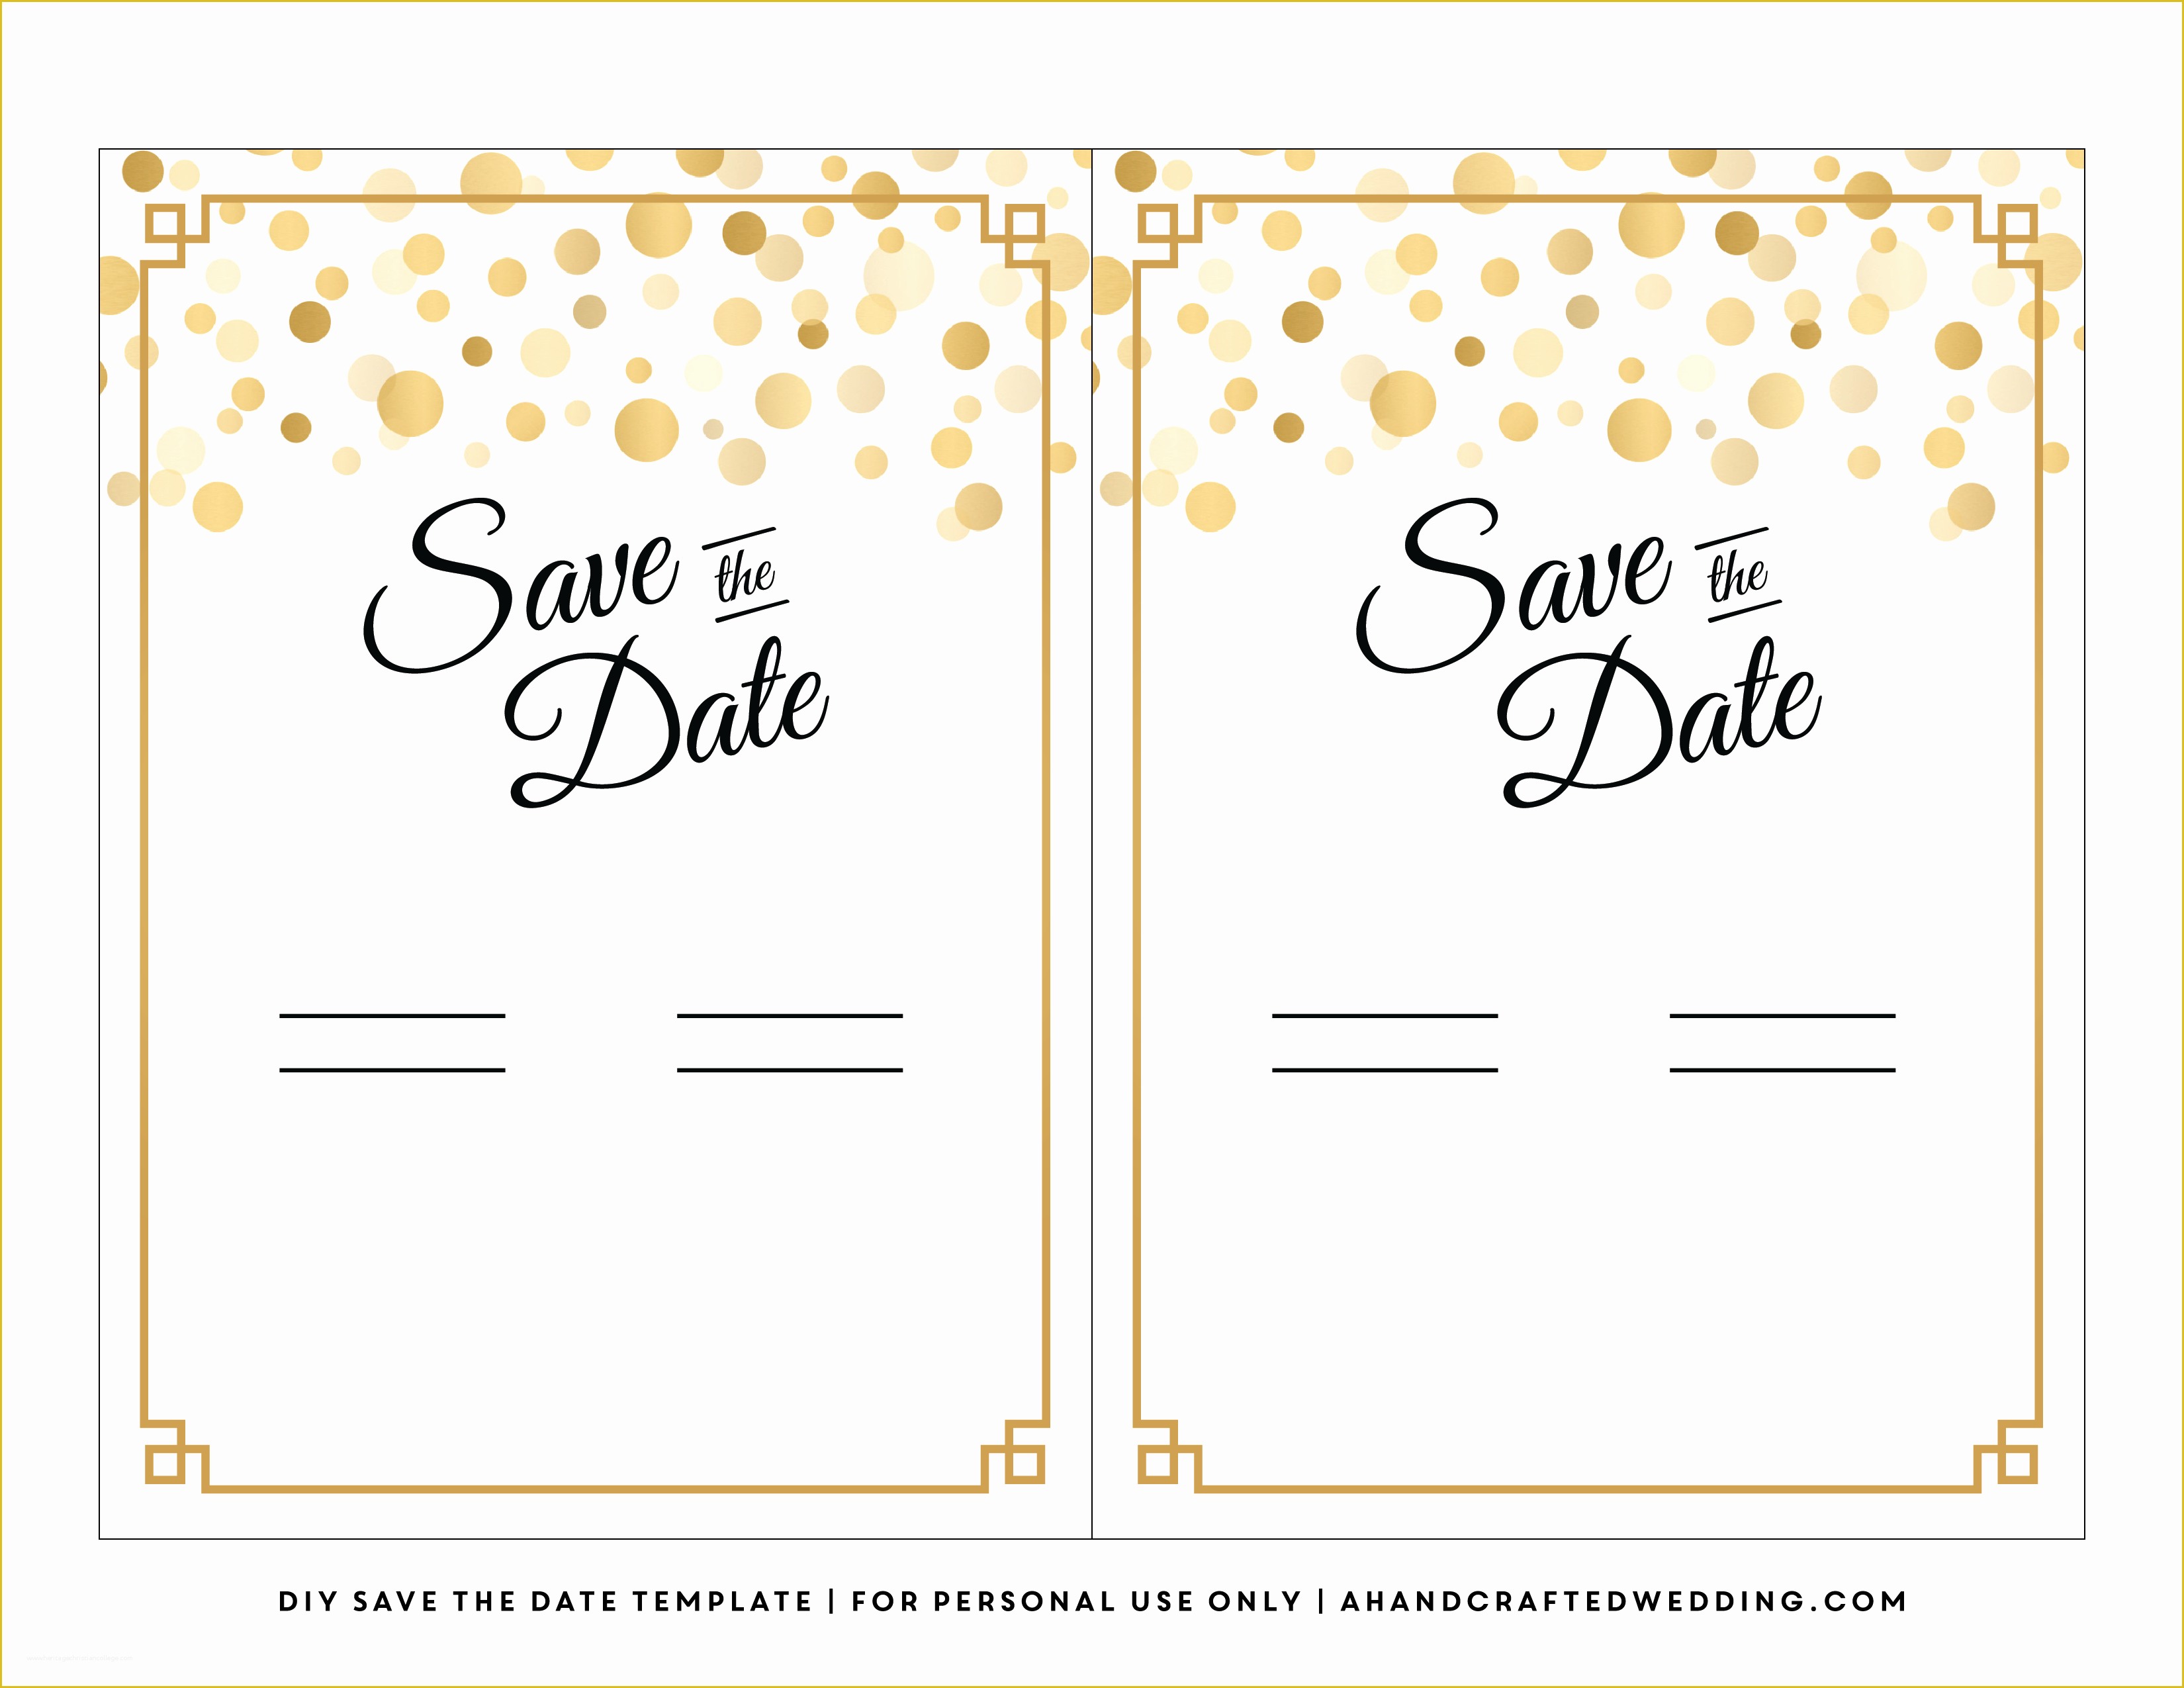 Free Save the Date Wedding Invitation Templates Of 7 Best Of Diy Save the Date Template Halloween